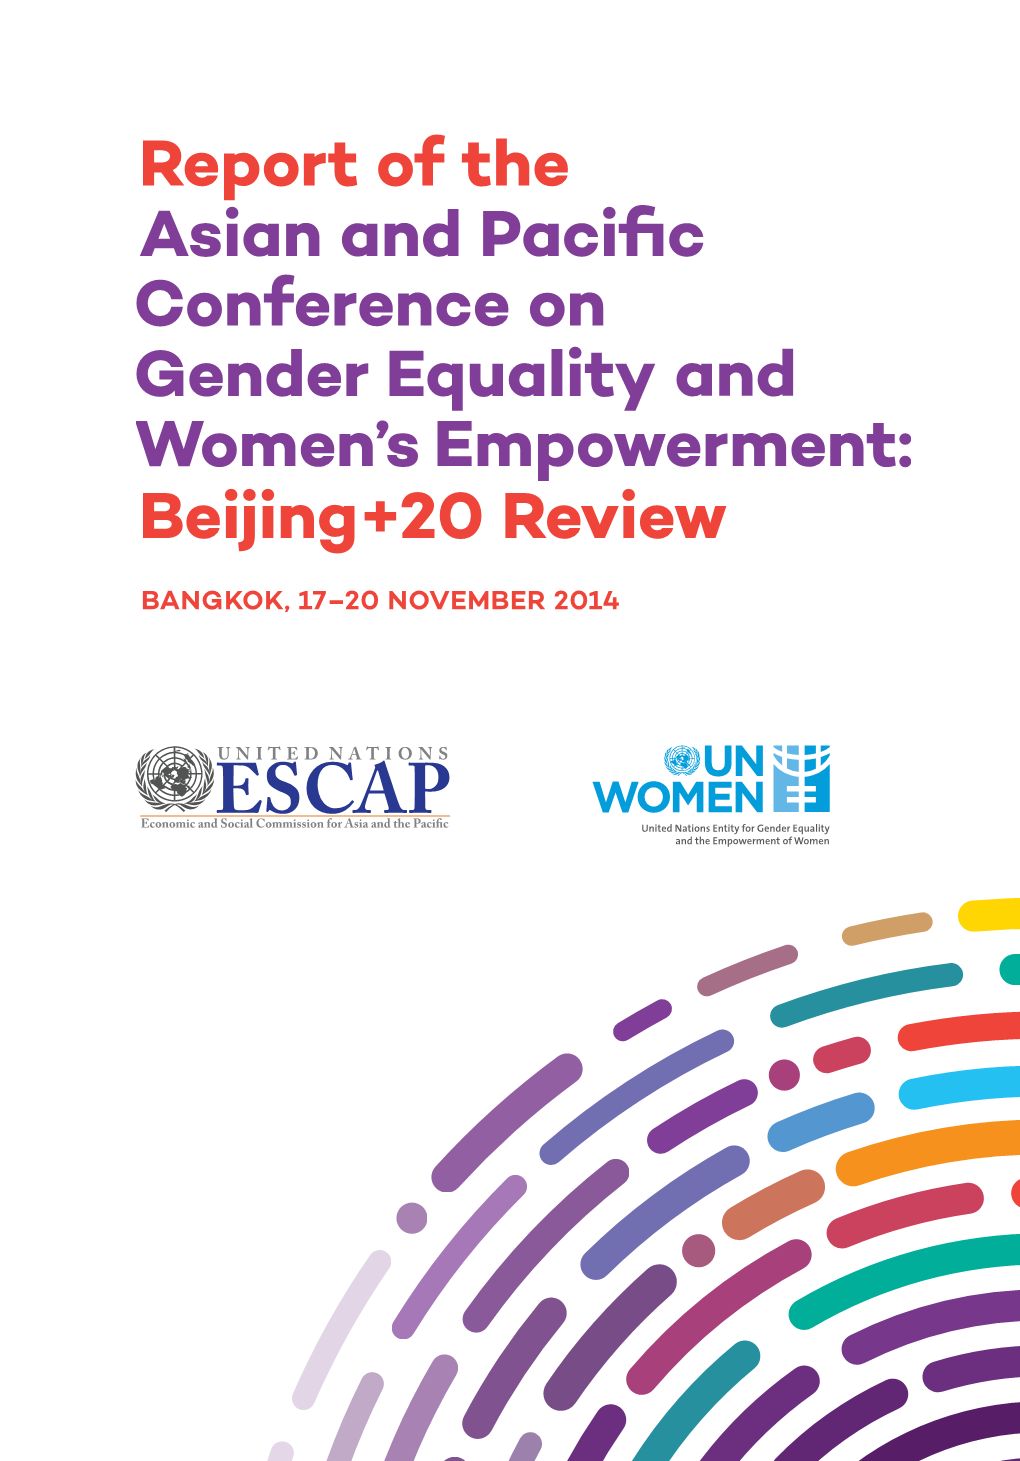 Report of the Asian and Pacific Conference on Gender Equality